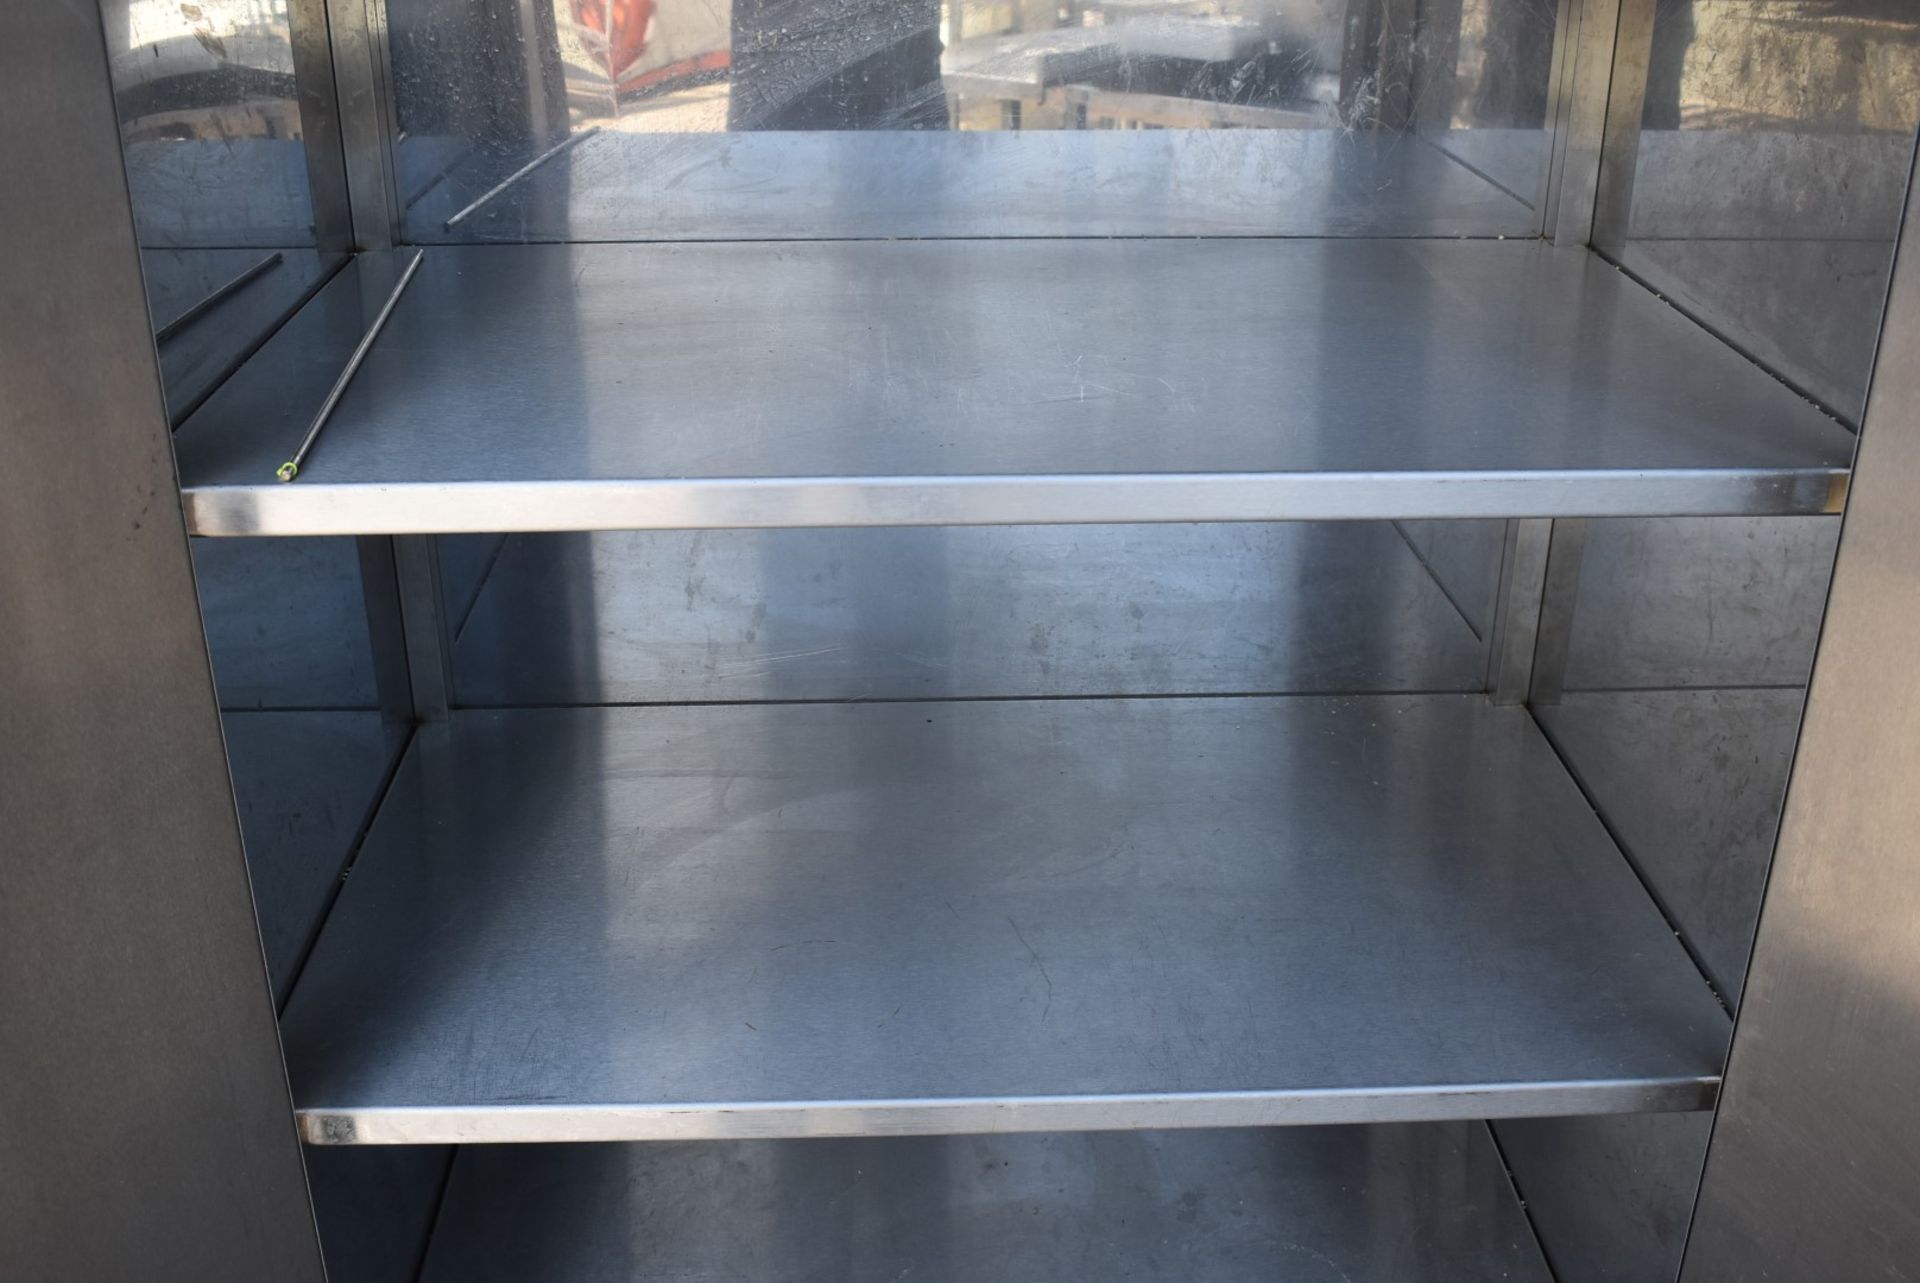 1 x Stainless Steel Two Door Upright Mobile Storage Cabinet - Recently Removed From Major Supermarke - Image 7 of 9